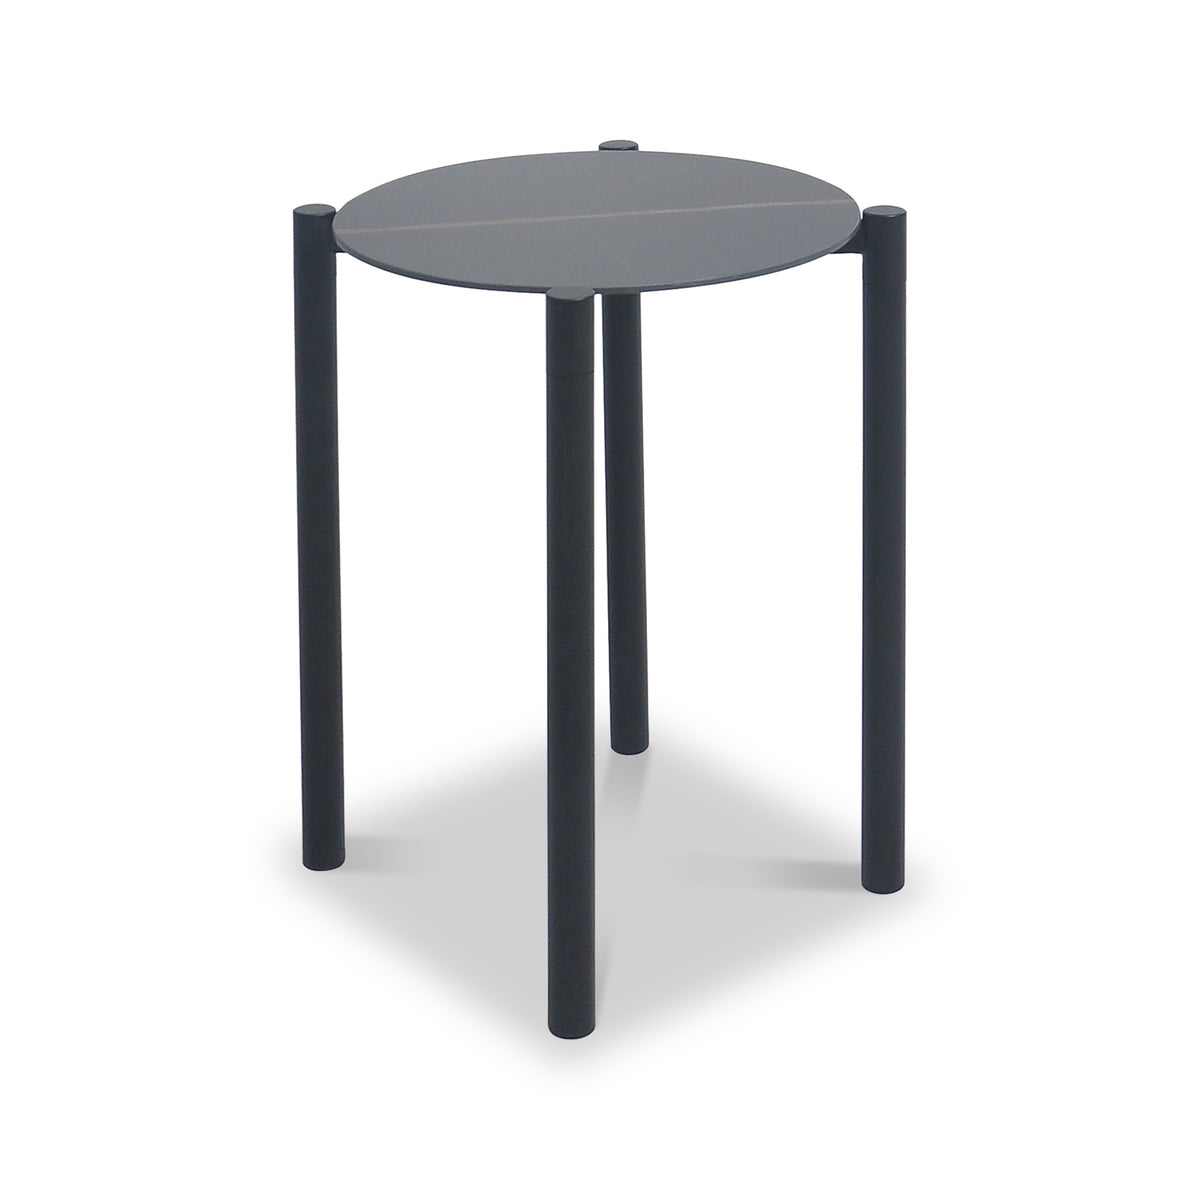 Dalston Black Marble Ceramic Side Table